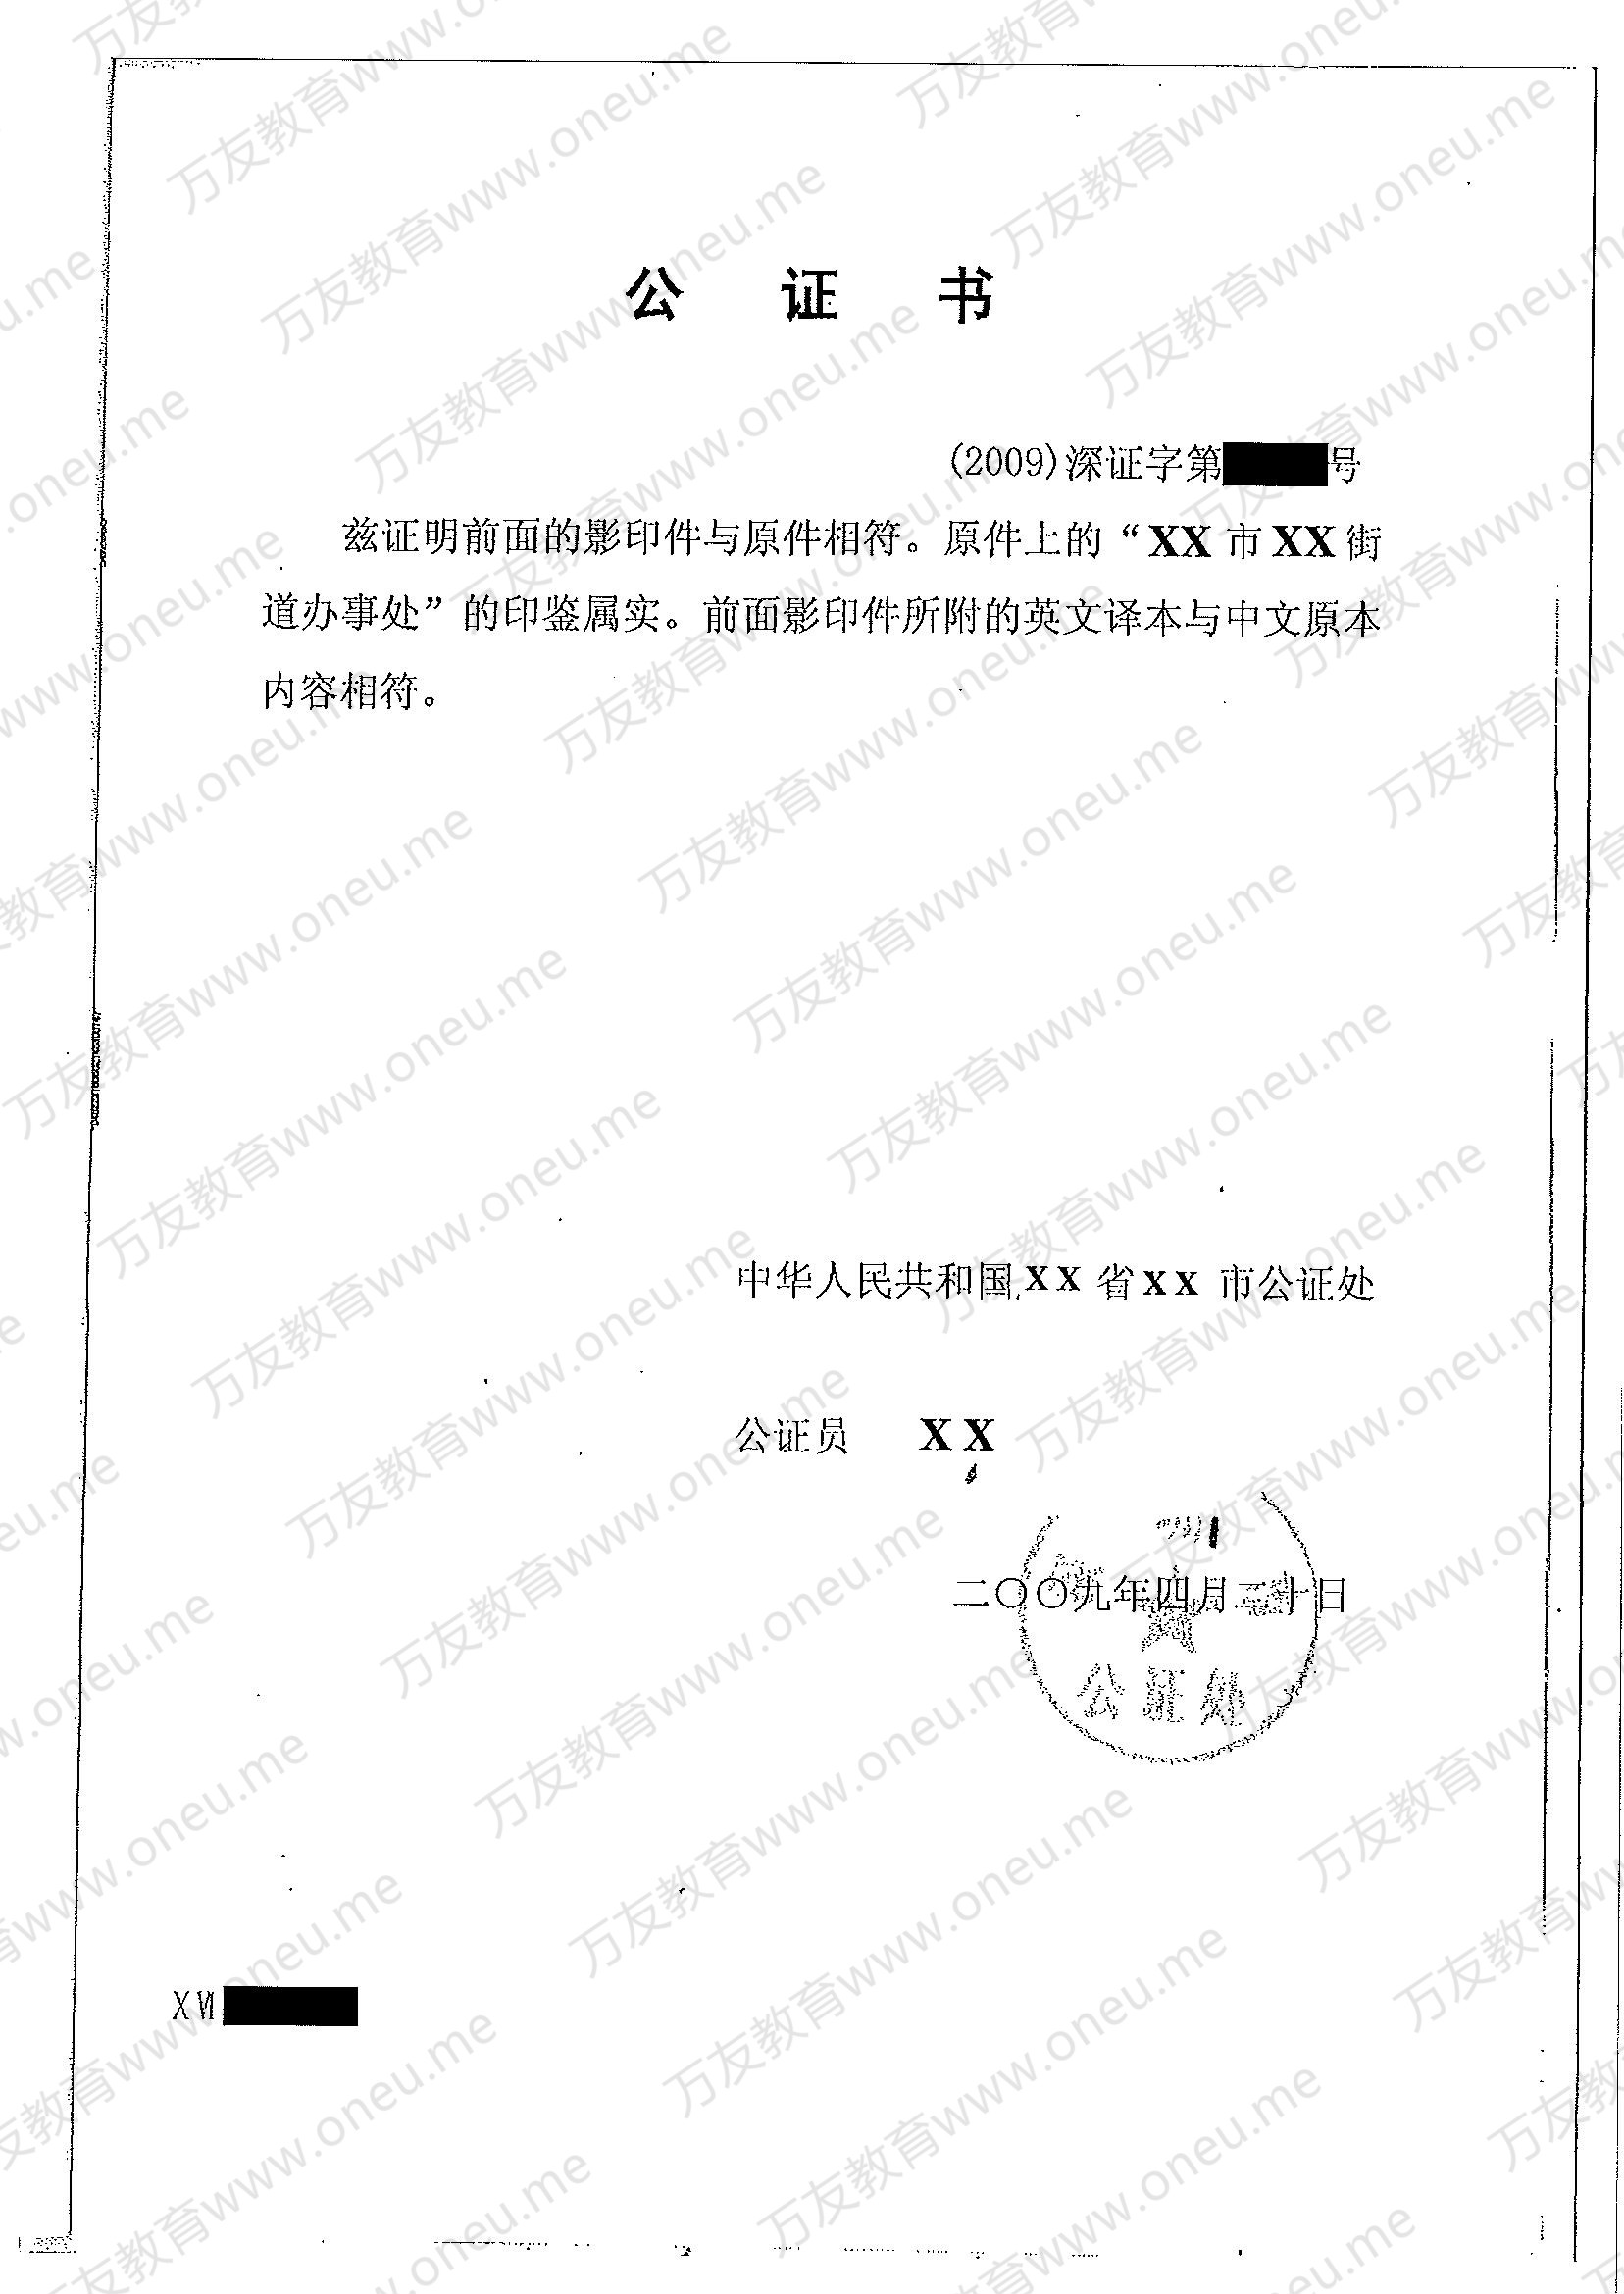 Notarized Marriage Certificate-结婚证书公证件